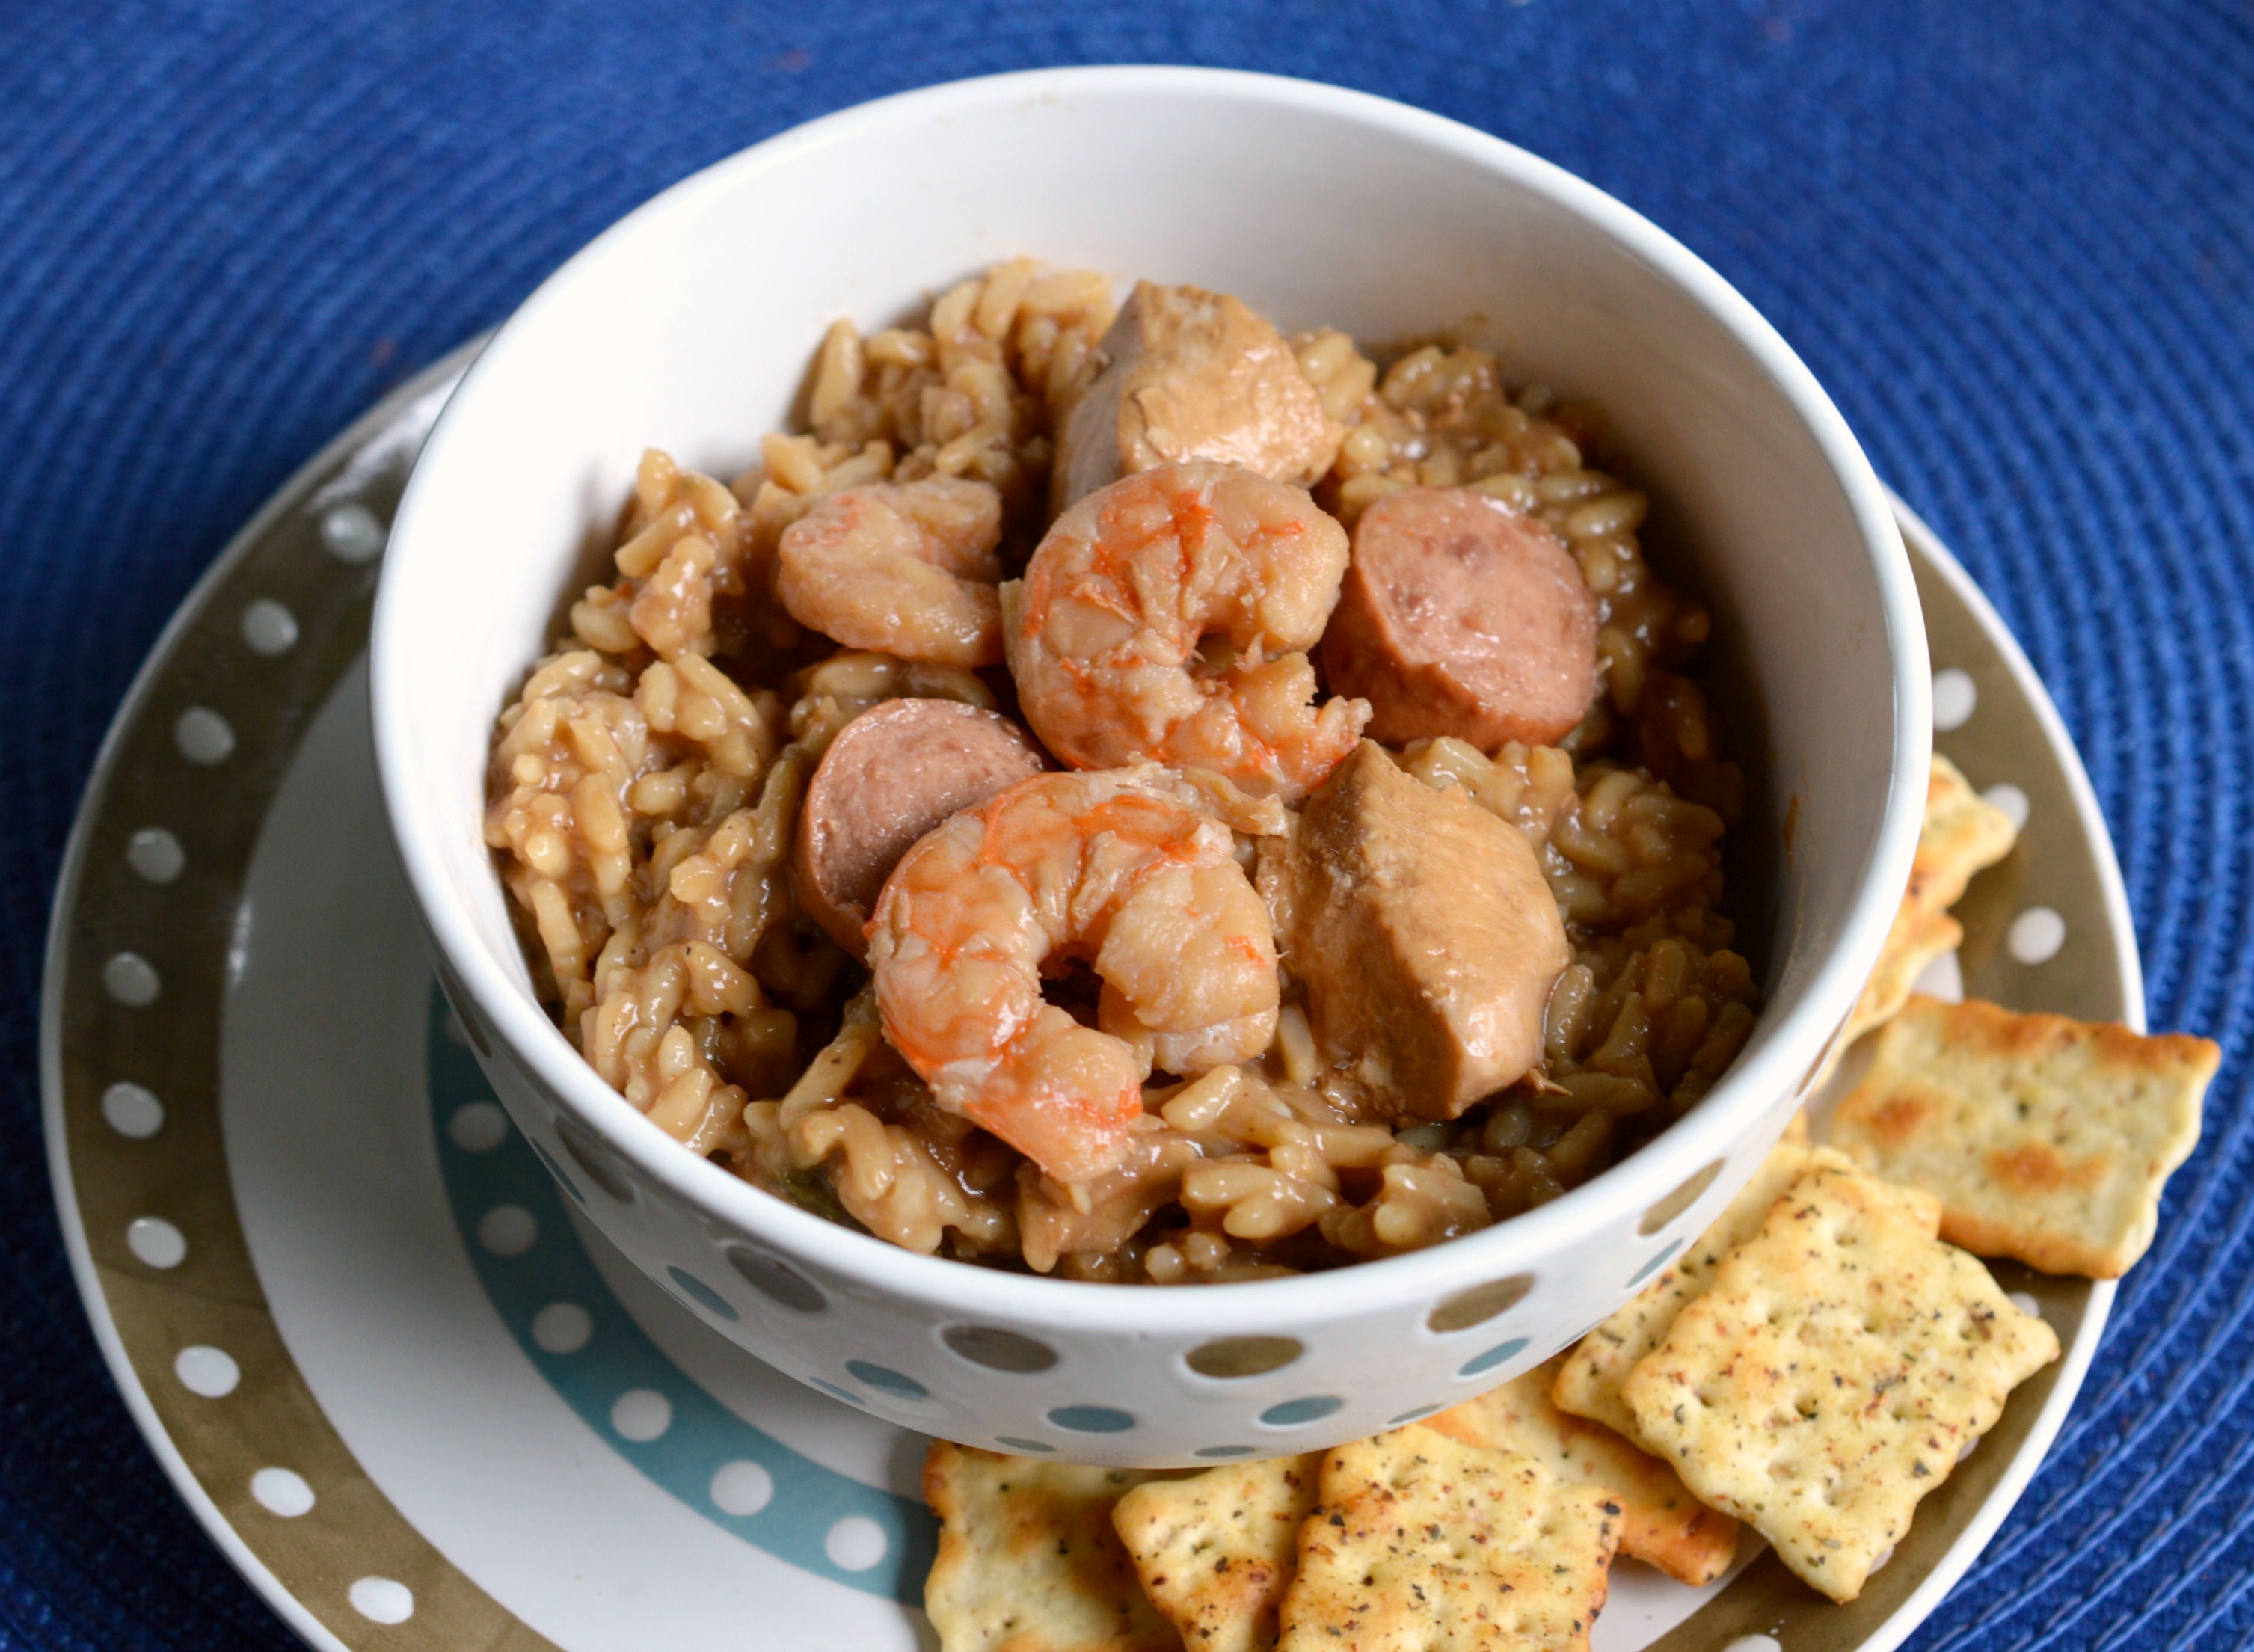 Shrimp Gumbo with Sausage and Chicken